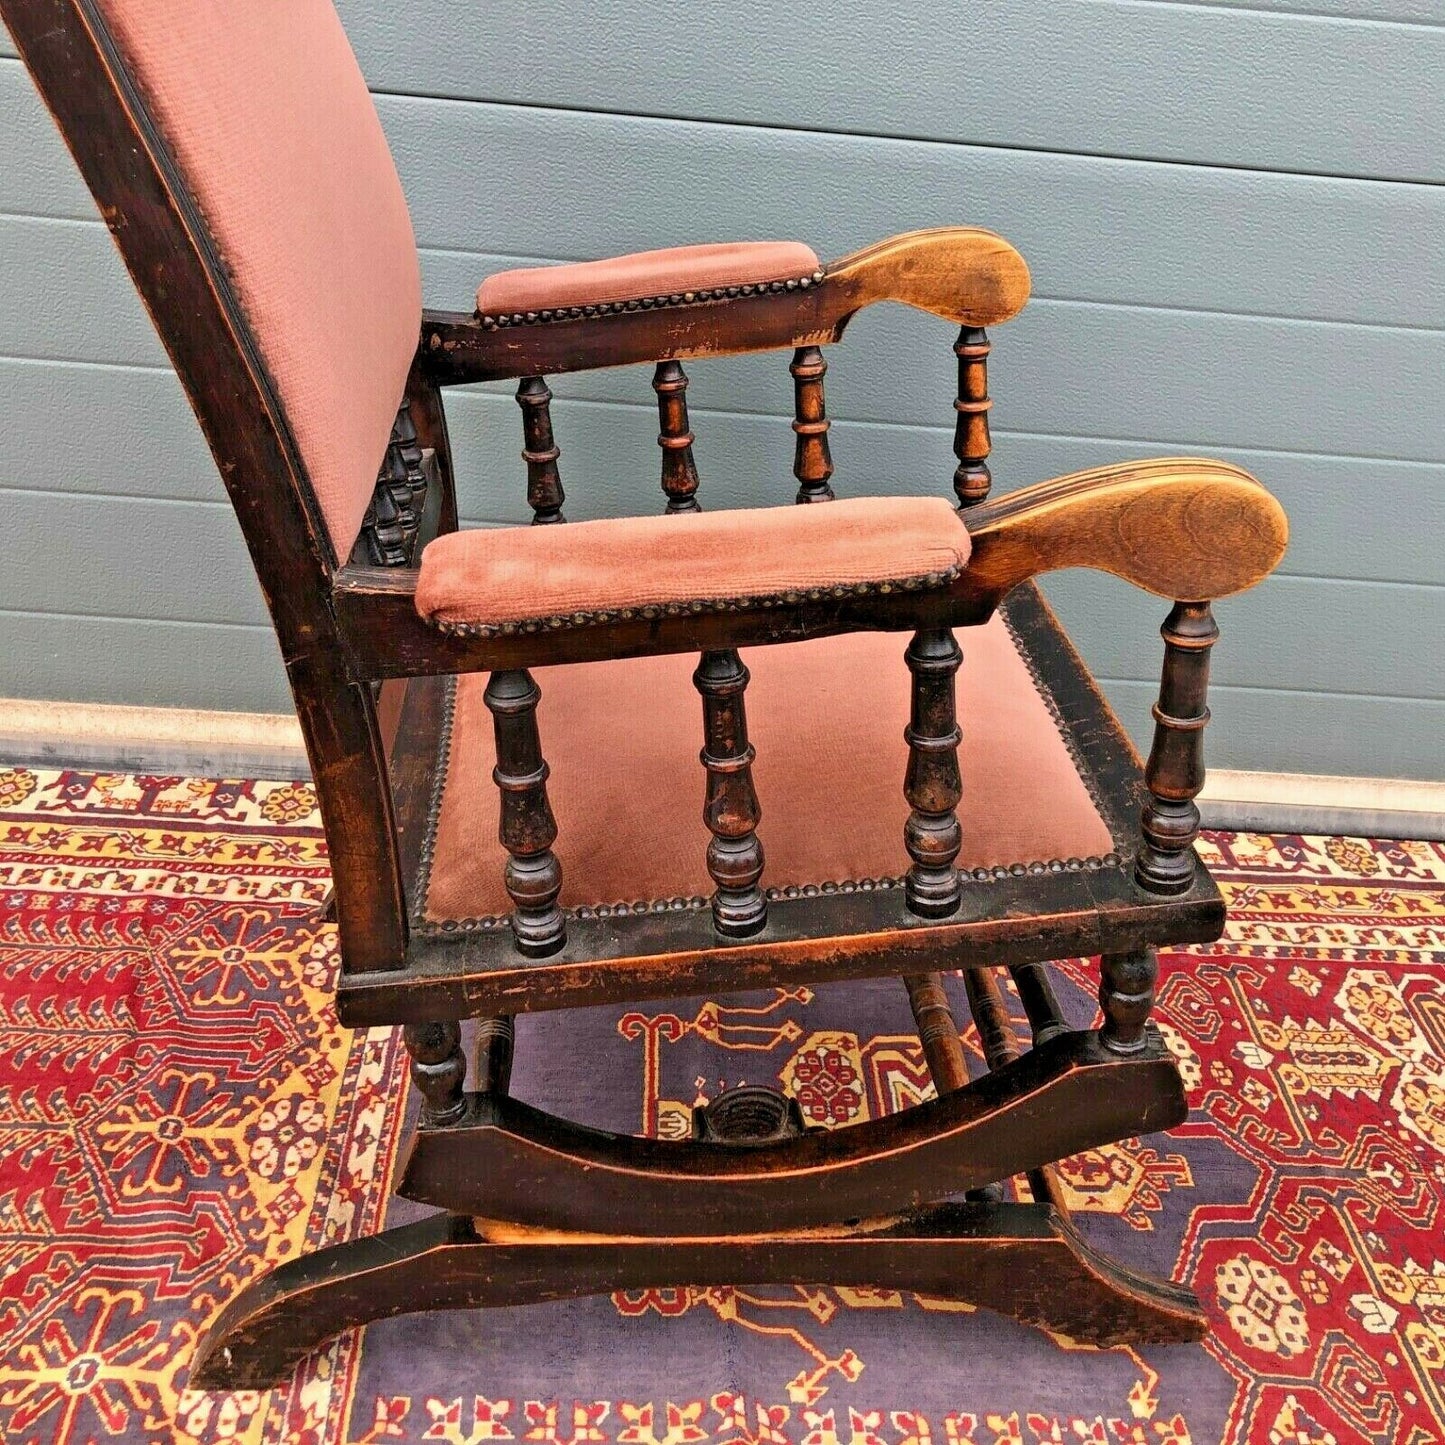 Antique American Rocking Chair / Vintage Rocking Chair ( SOLD )